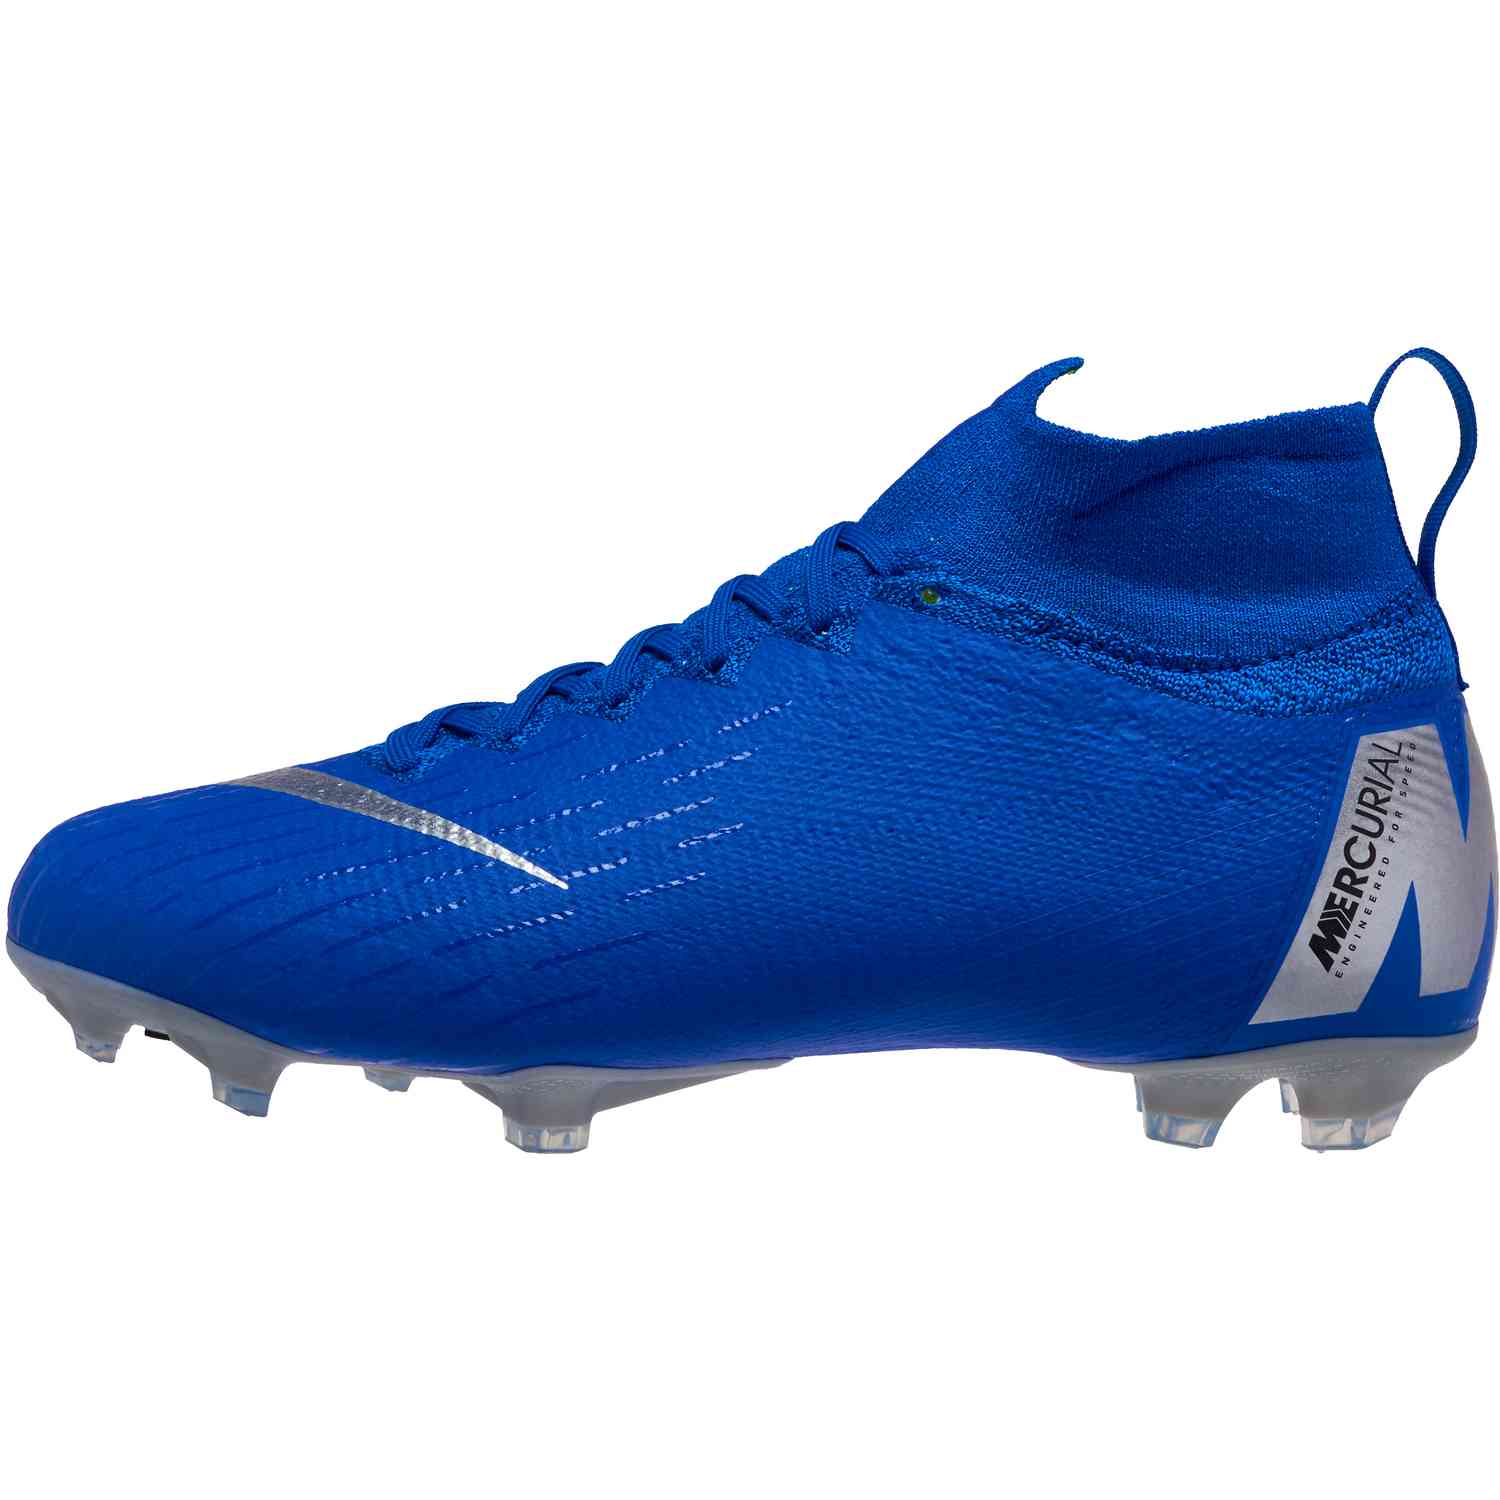 Nike Mercurial Superfly VI Academy TF Turf Soccer Shoes.